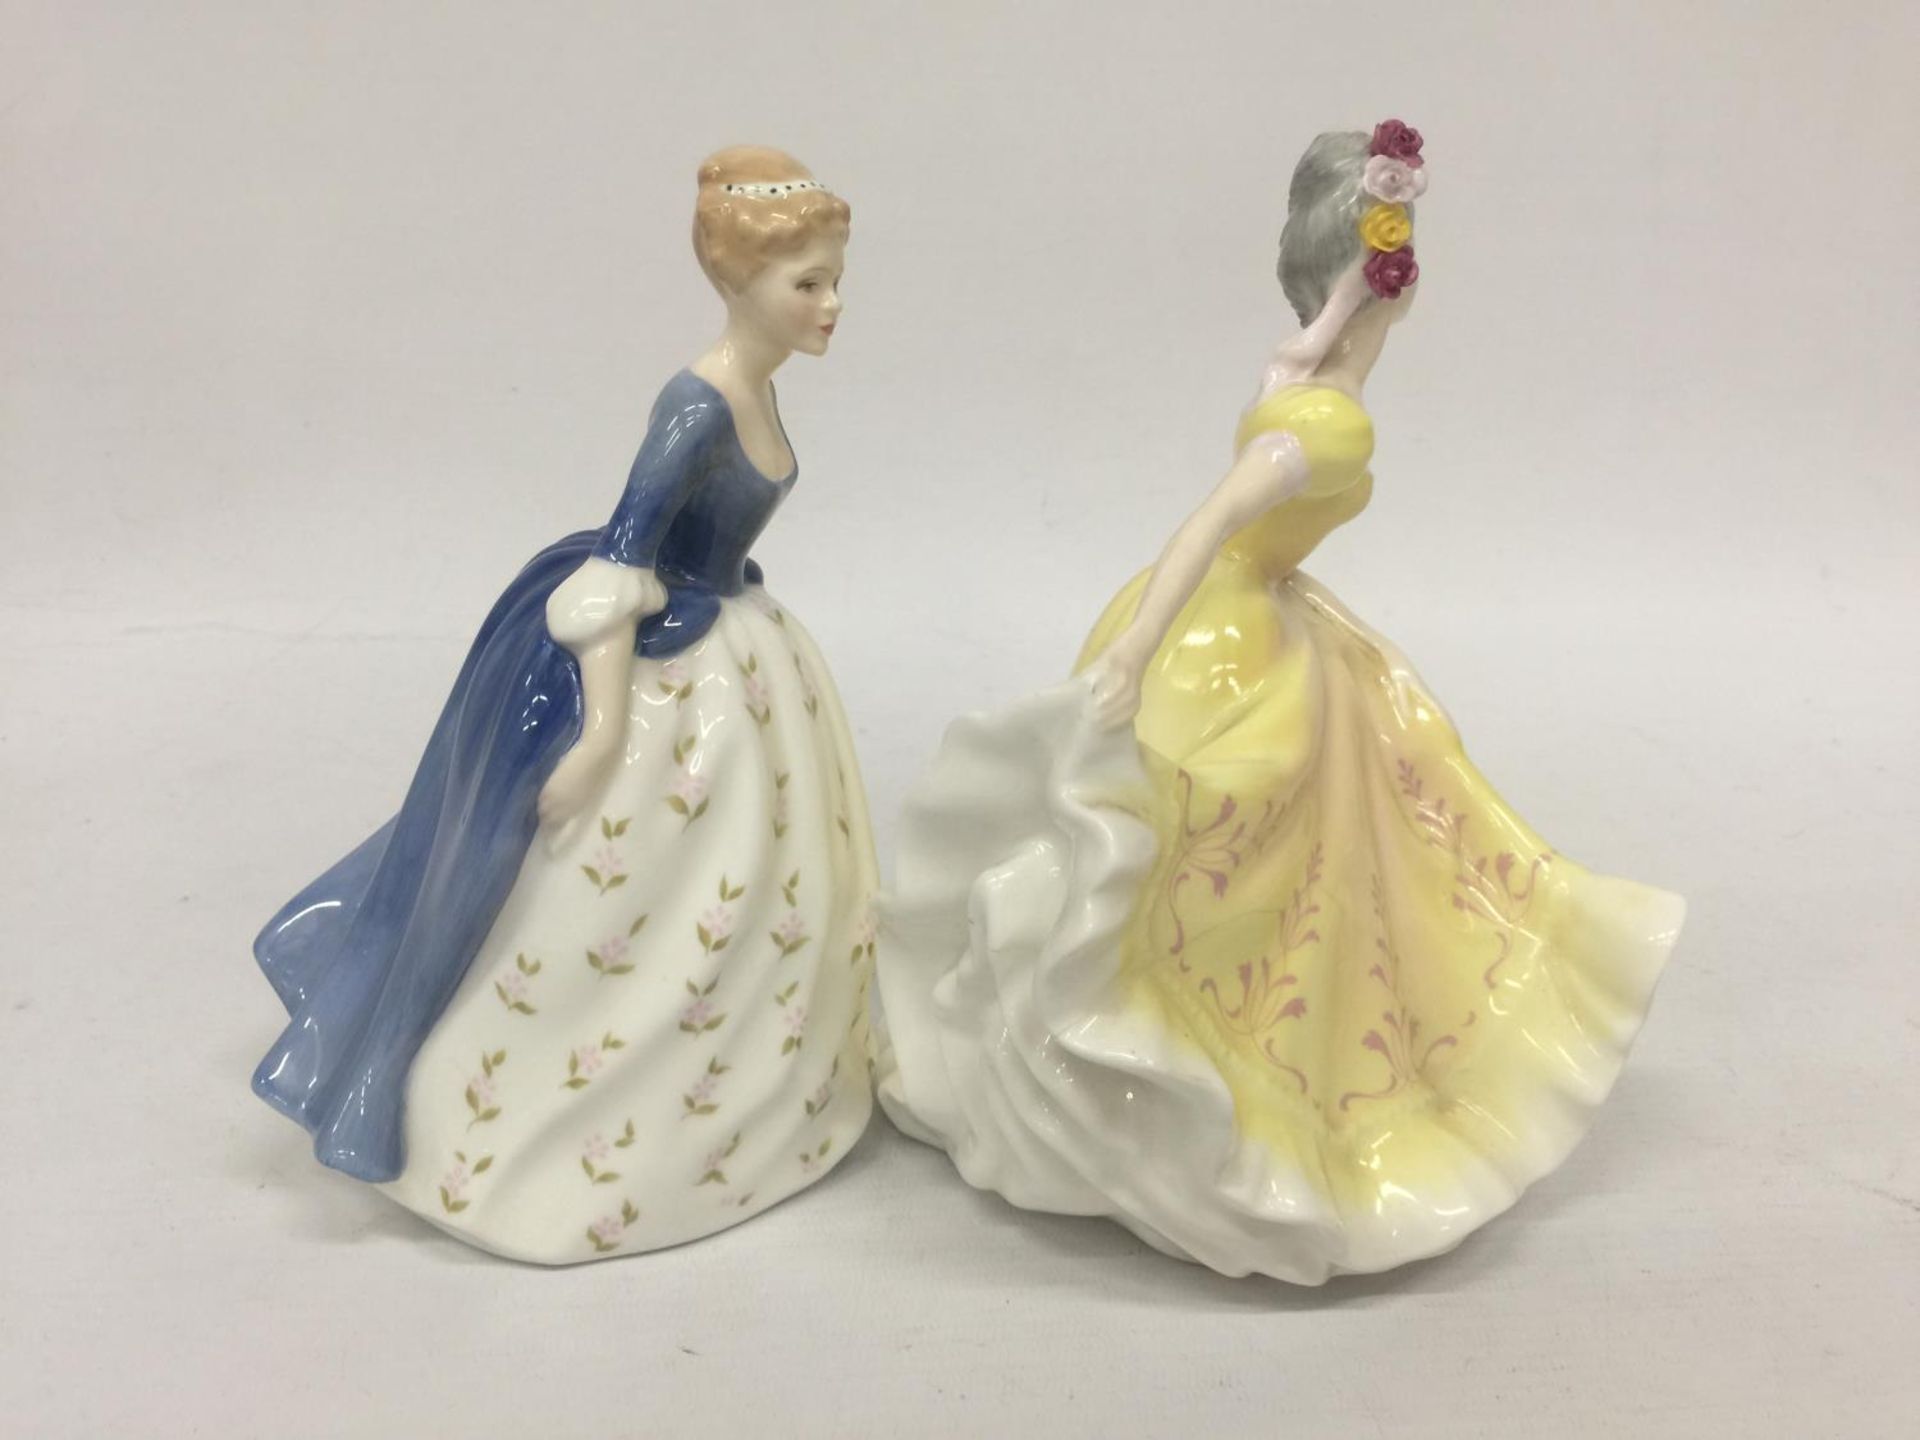 TWO ROYAL DOULTON FIGURINES "ALISON" HN 2336 (19 CM) AND NINETTE HN 2379 A/F (21 CM) - Image 2 of 5